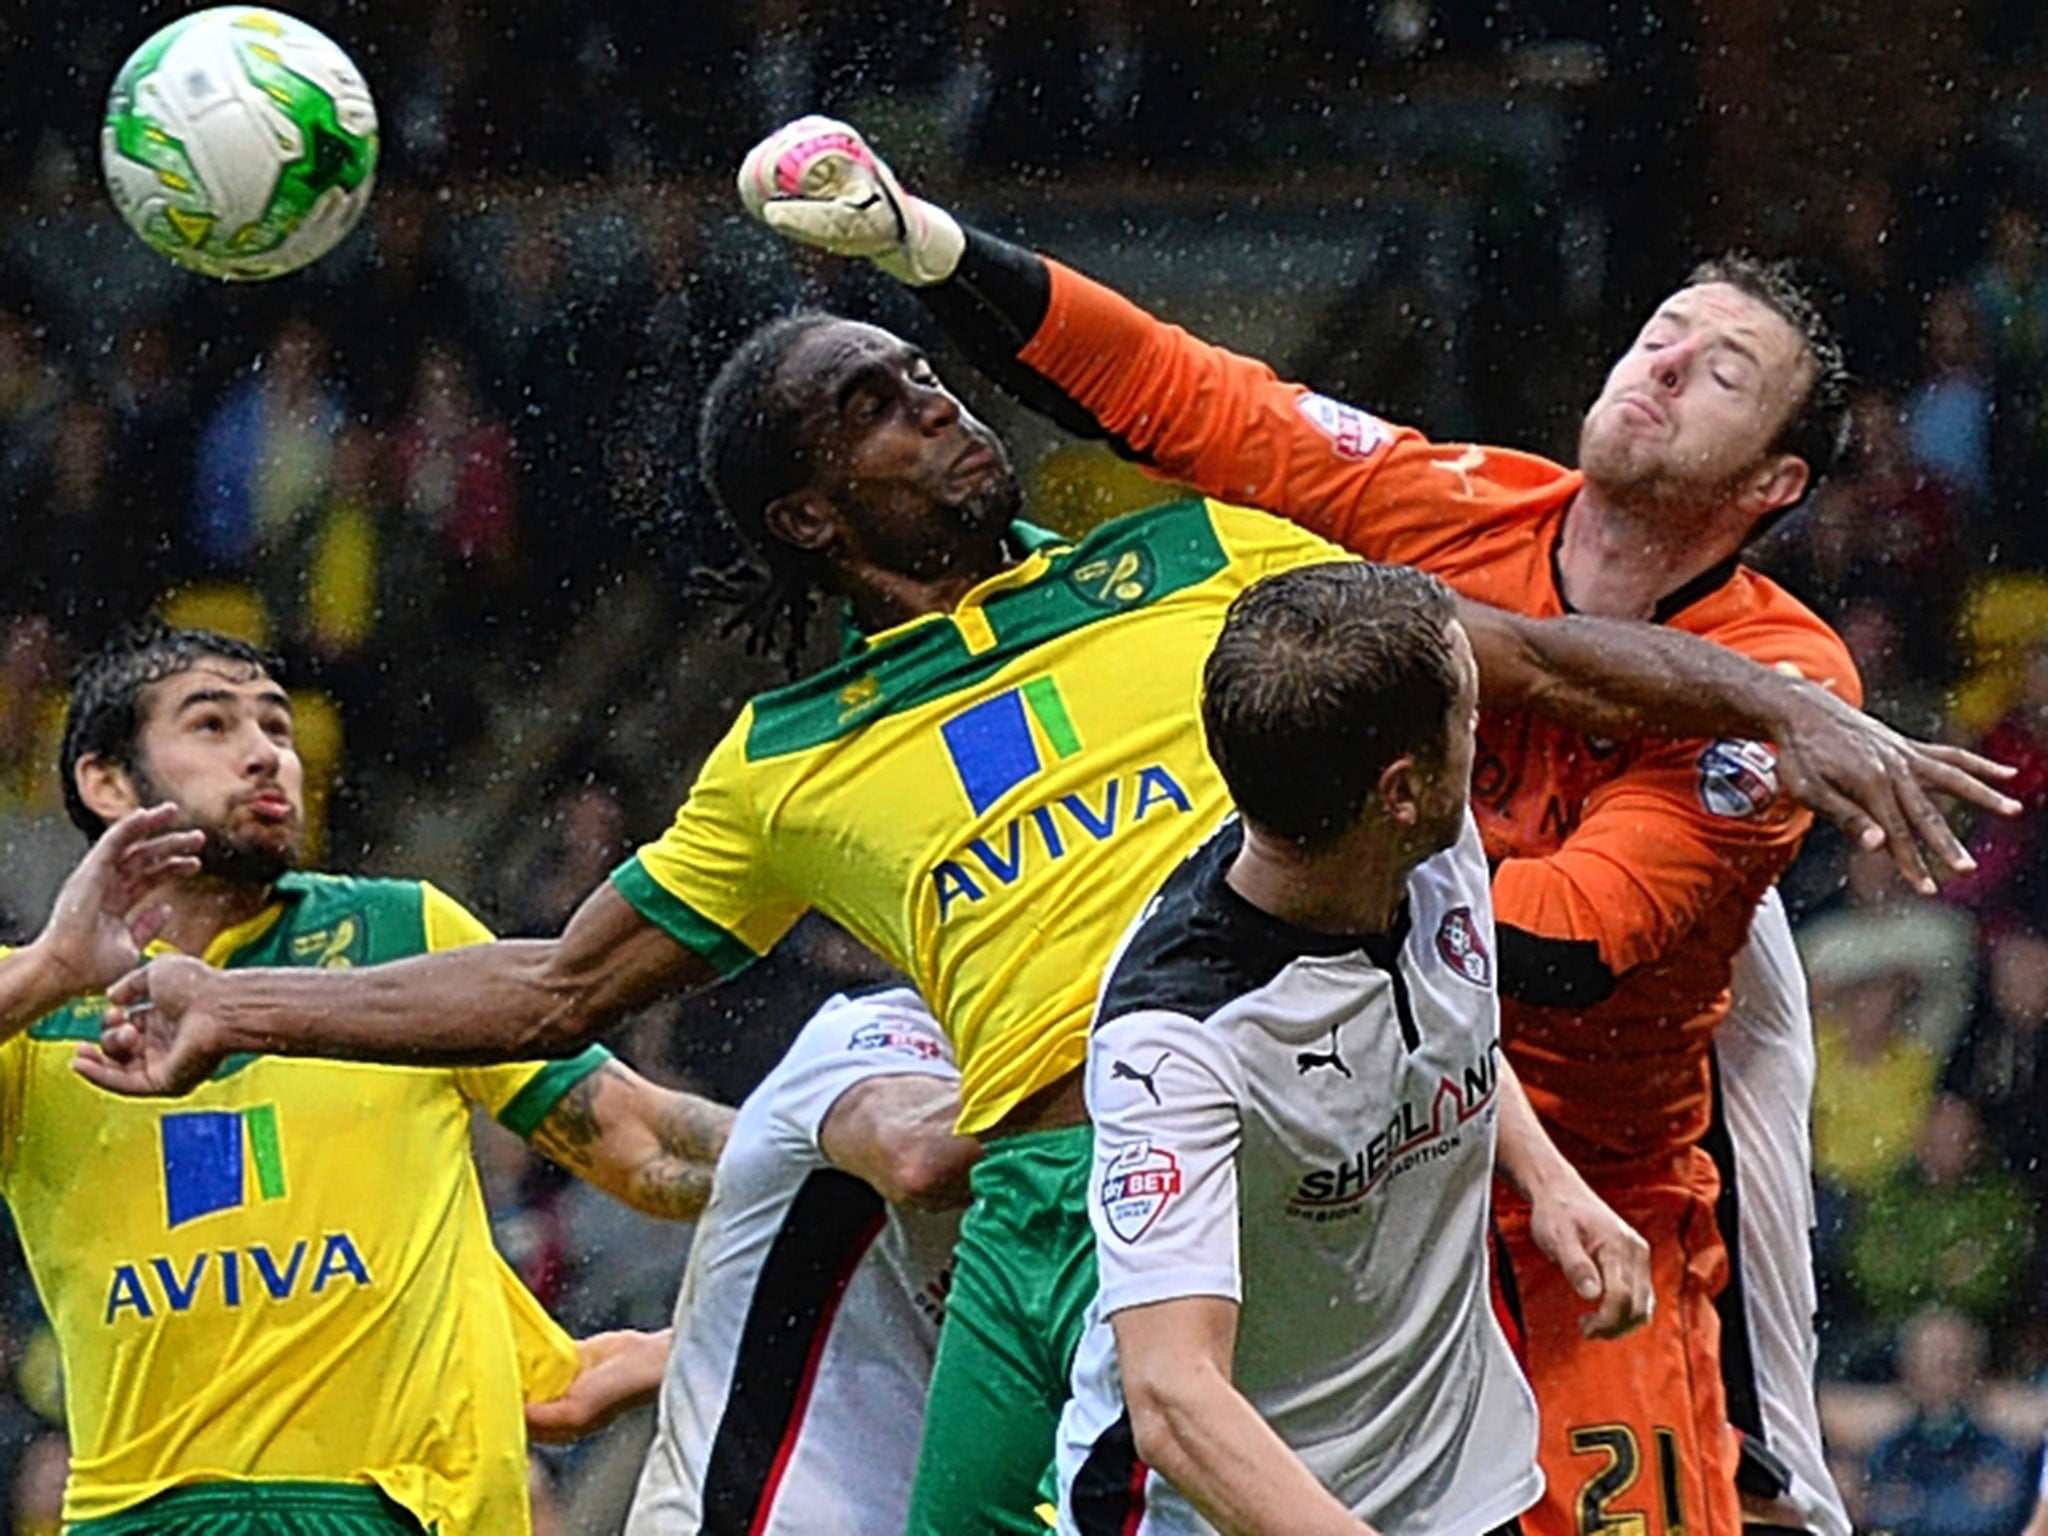 Pleased as punch: Rotherham’s heroic goalkeeper Adam Collin beats Norwich scorer Cameron Jerome to the ball